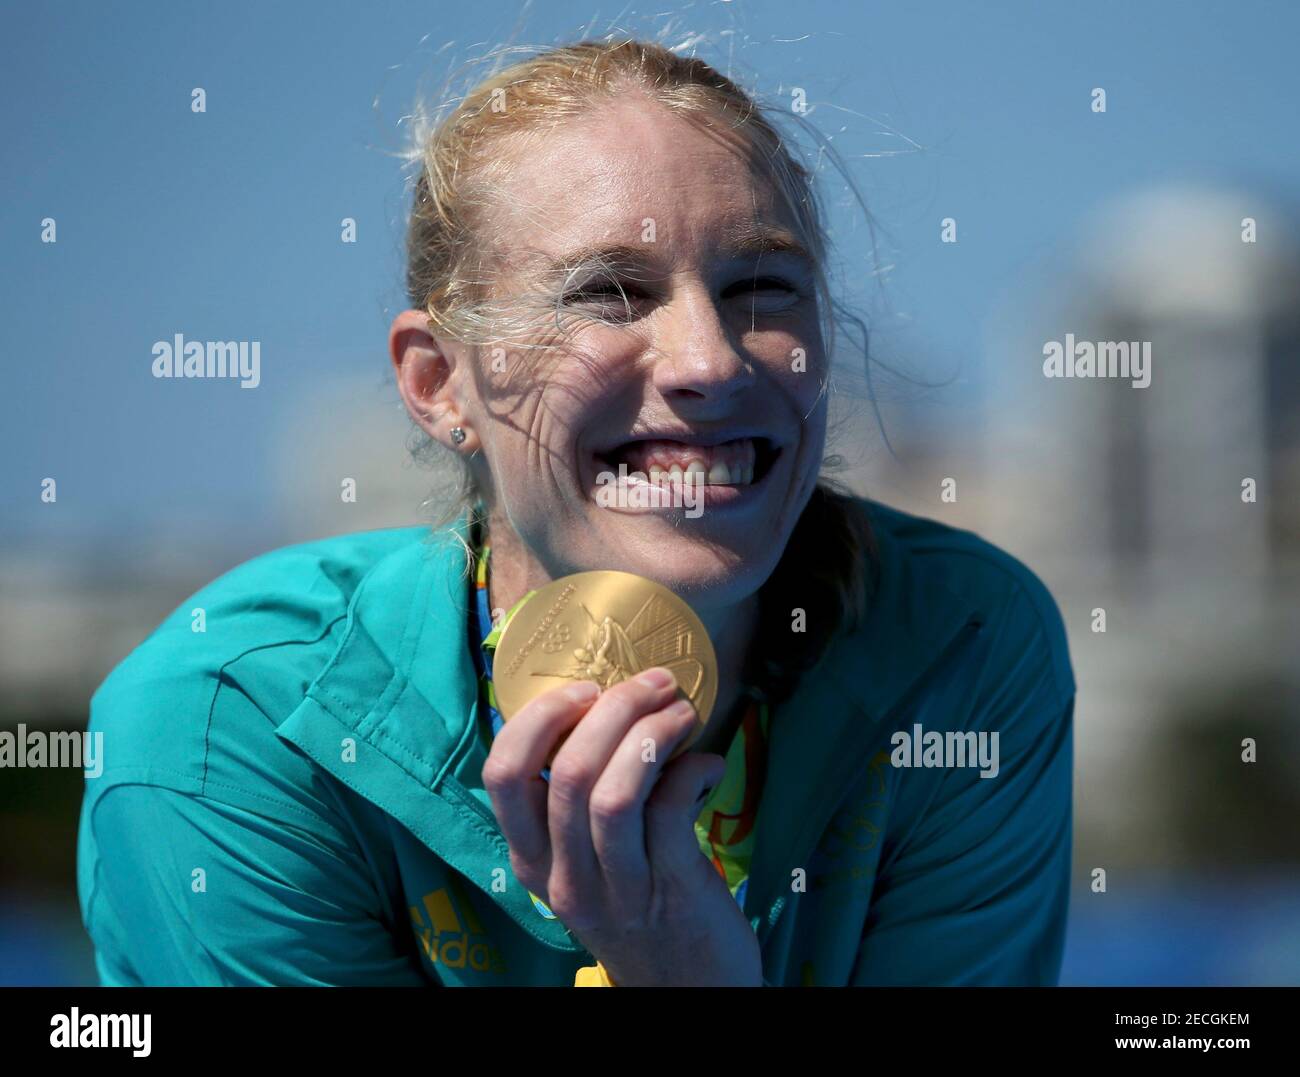 2016 Rio Olympics - Rowing - Final - Women's Single Sculls Victory Ceremony - Lagoa Stadium - Rio De Janeiro, Brazil - 13/08/2016. Kim Brennan (AUS) of Australia poses with her gold medal. REUTERS/Carlos Barria  FOR EDITORIAL USE ONLY. NOT FOR SALE FOR MARKETING OR ADVERTISING CAMPAIGNS.     Picture Supplied by Action Images Stock Photo